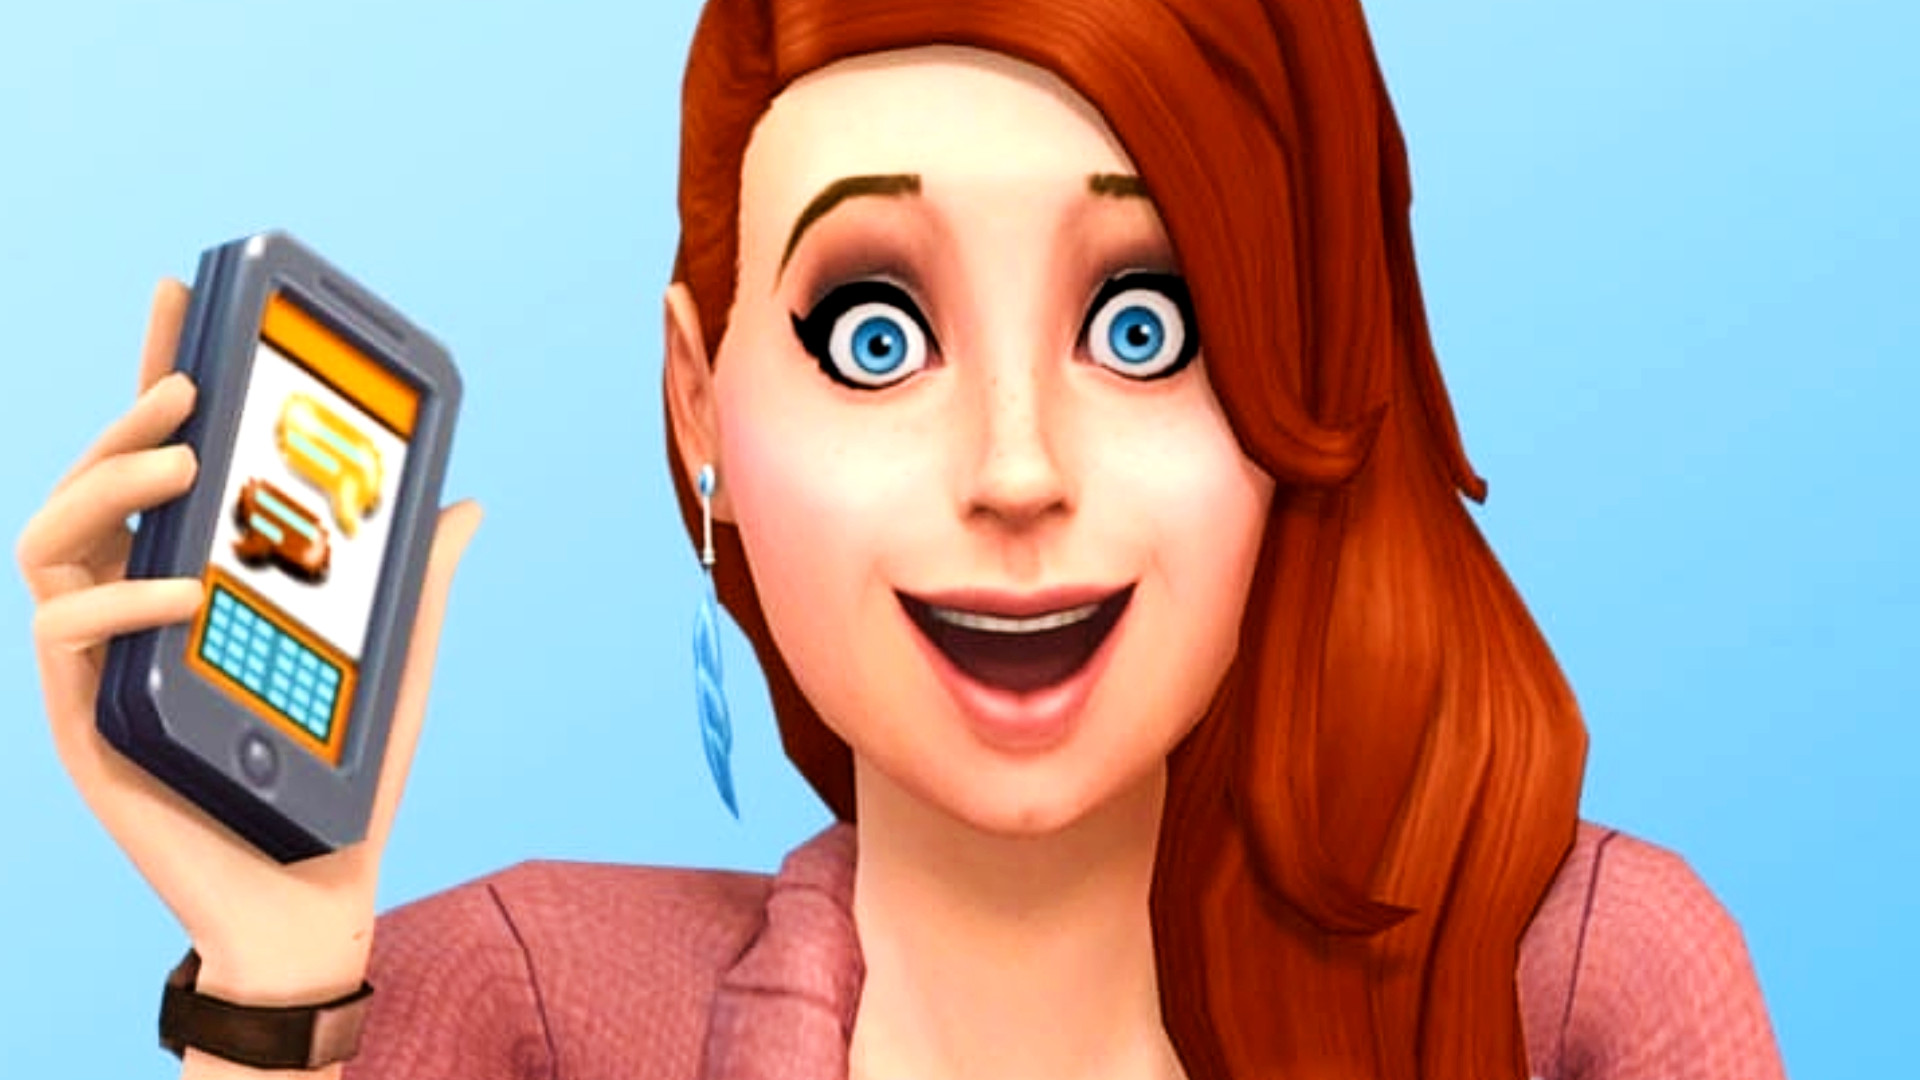 The Sims 4 team wants you to vote for its next DLC